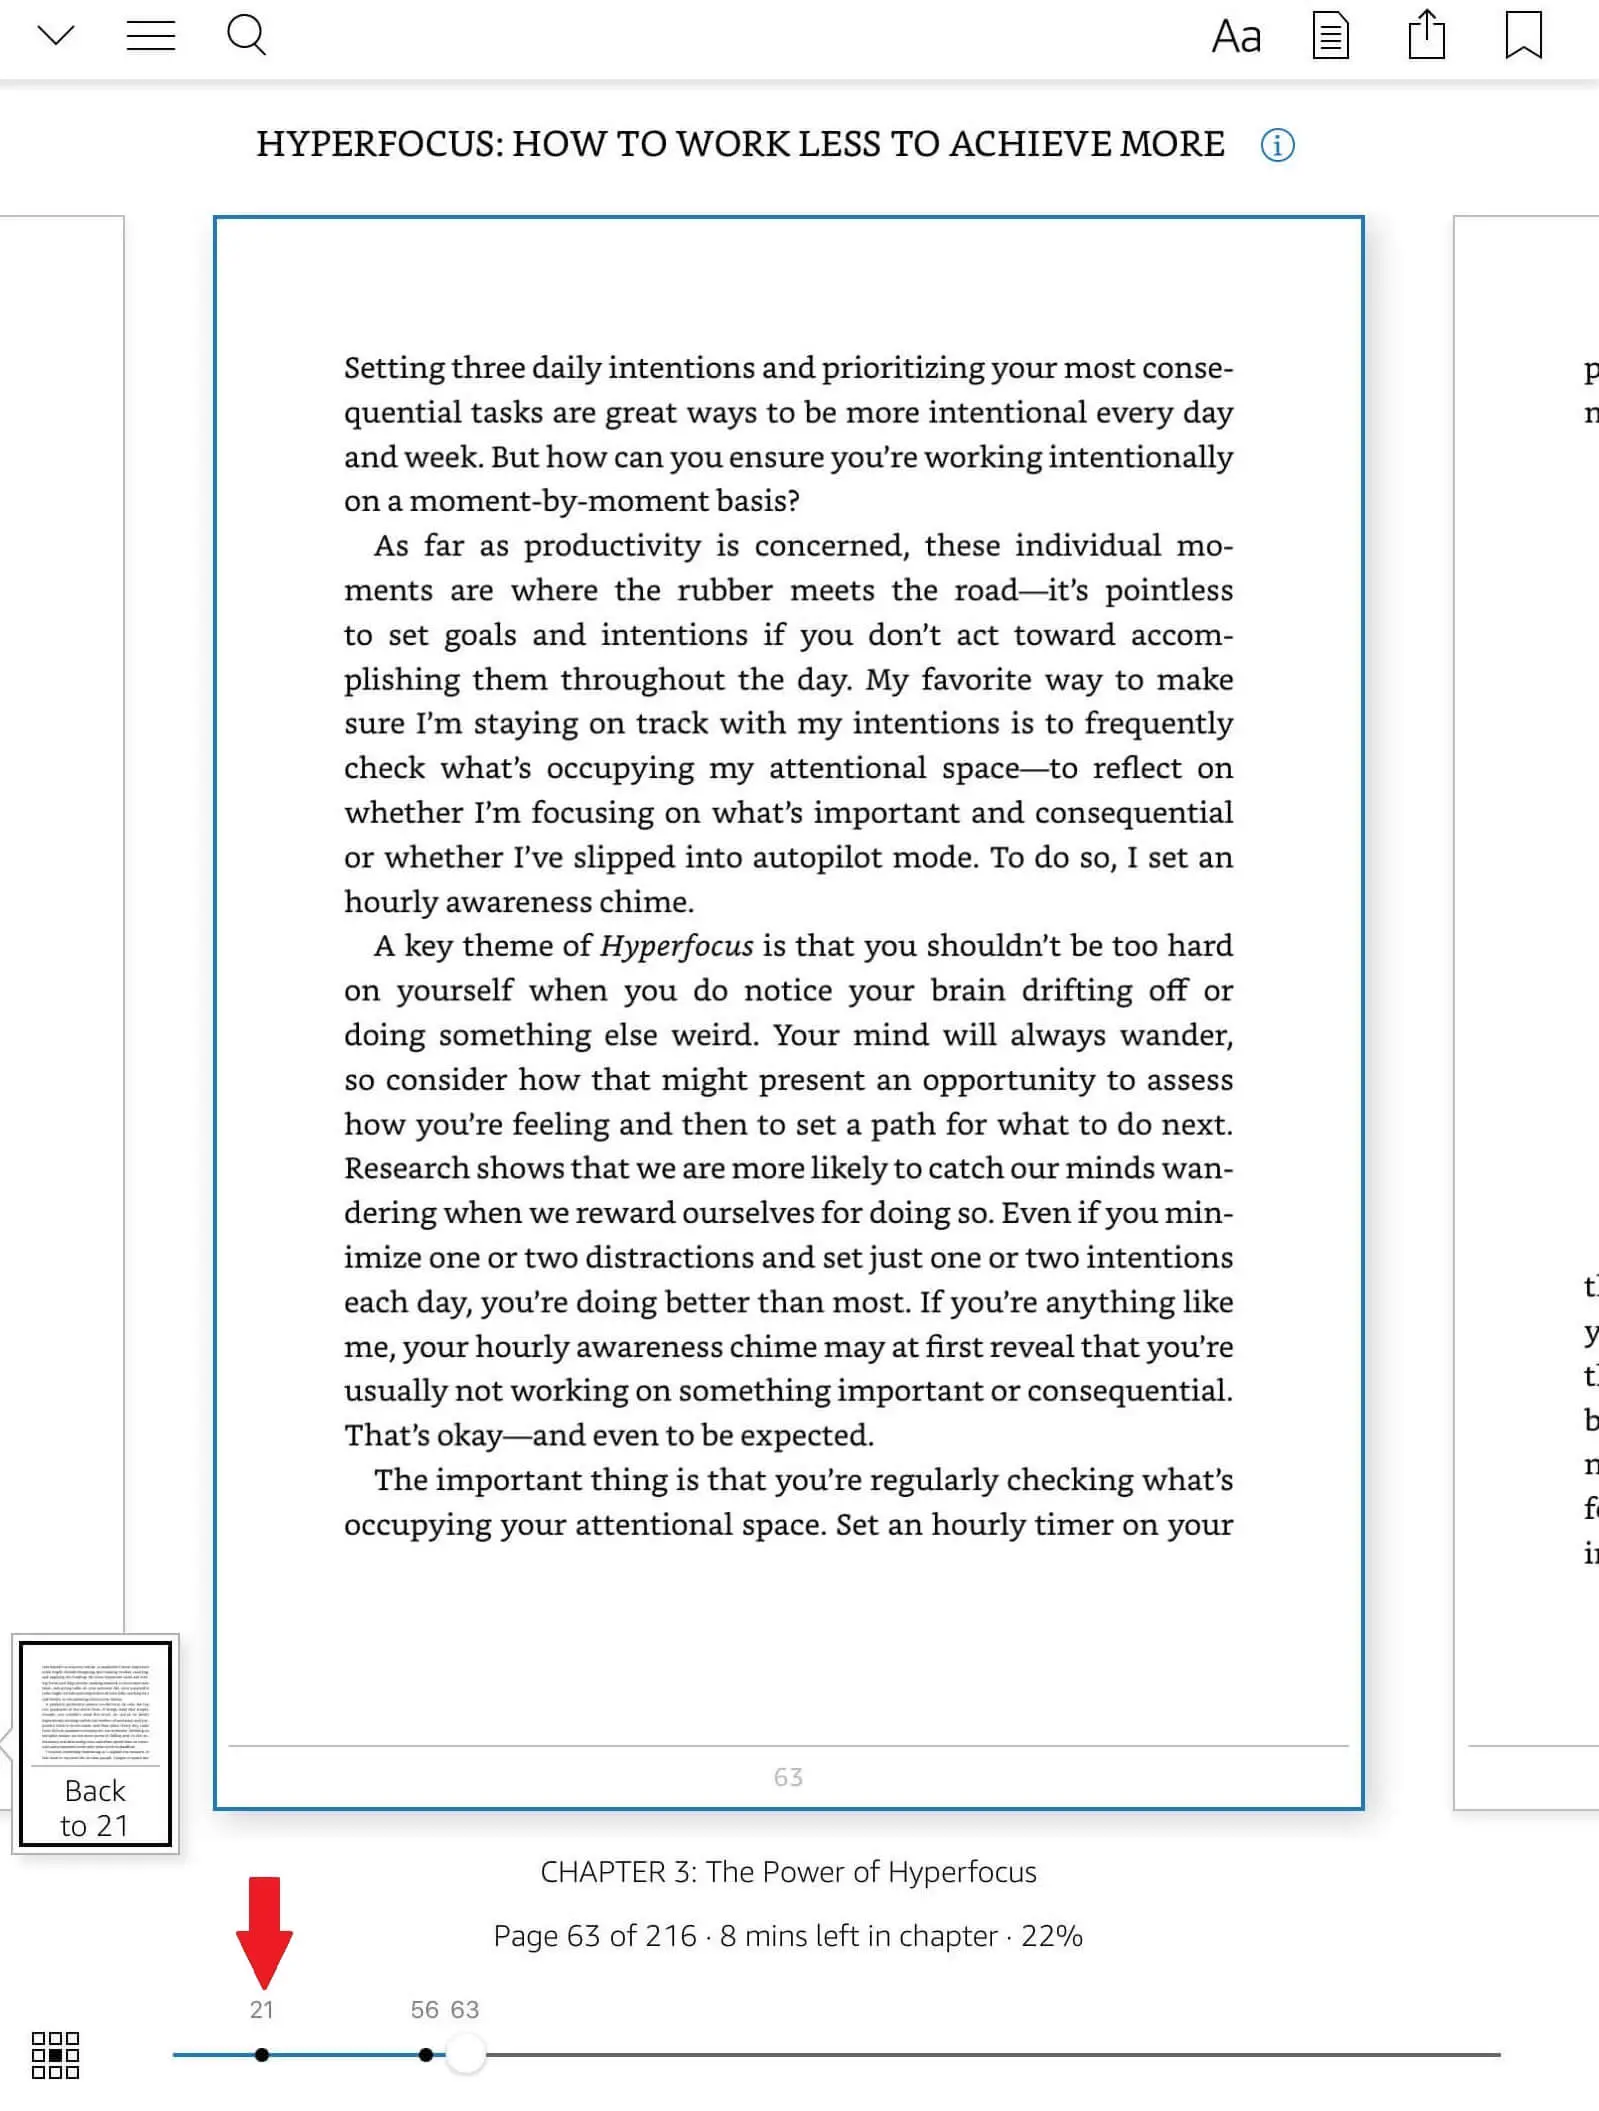 Access bookmarks on Kindle App